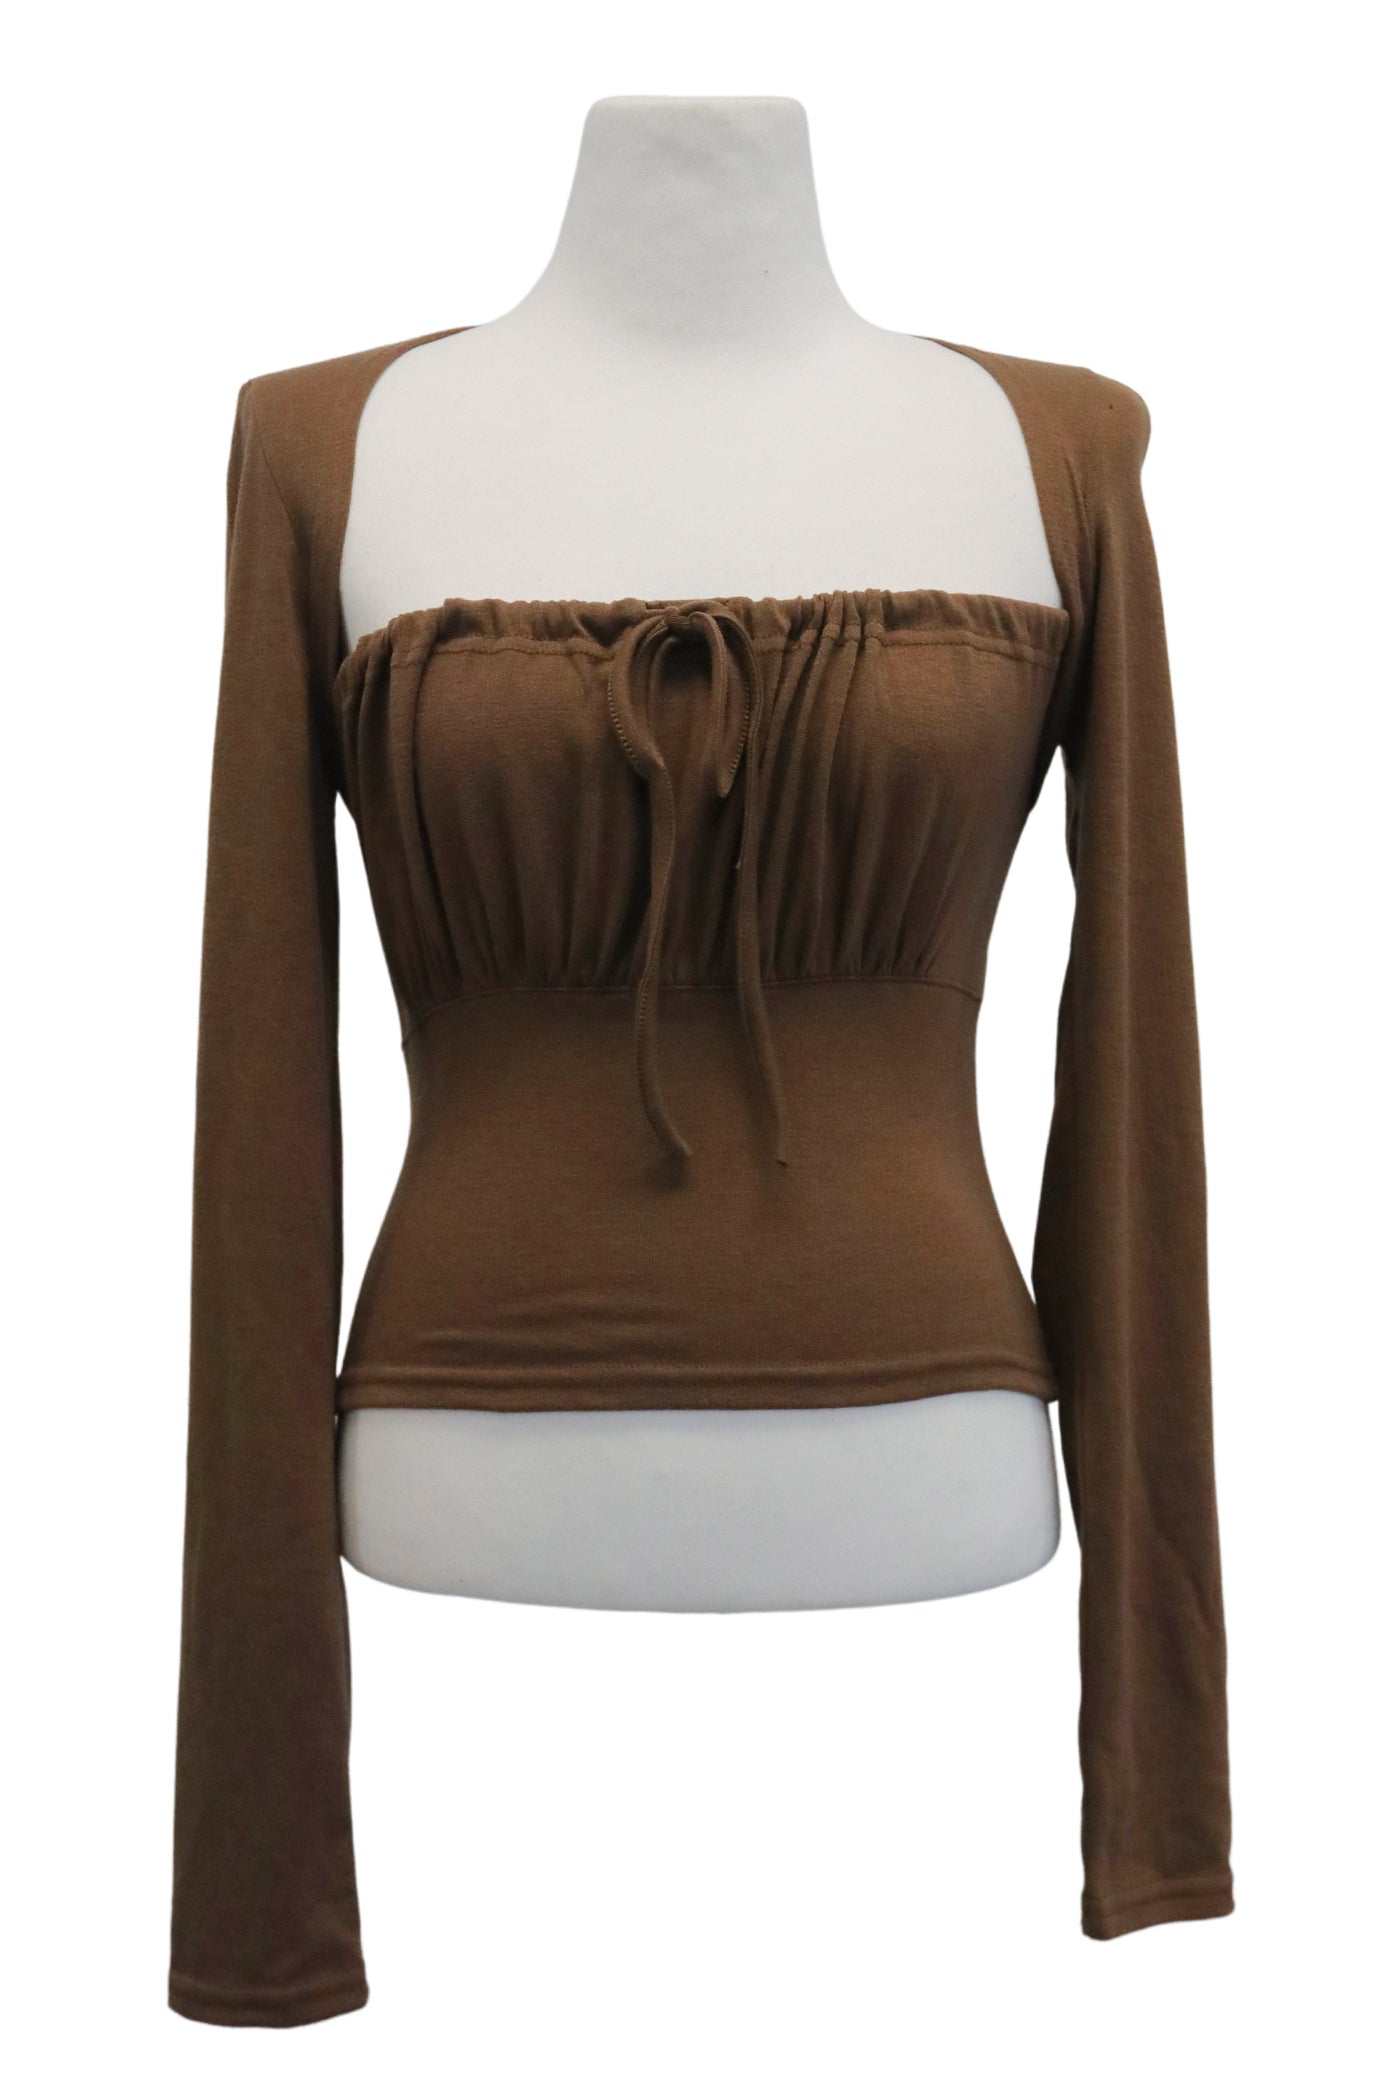 storets.com Alexis Front Ruched Top